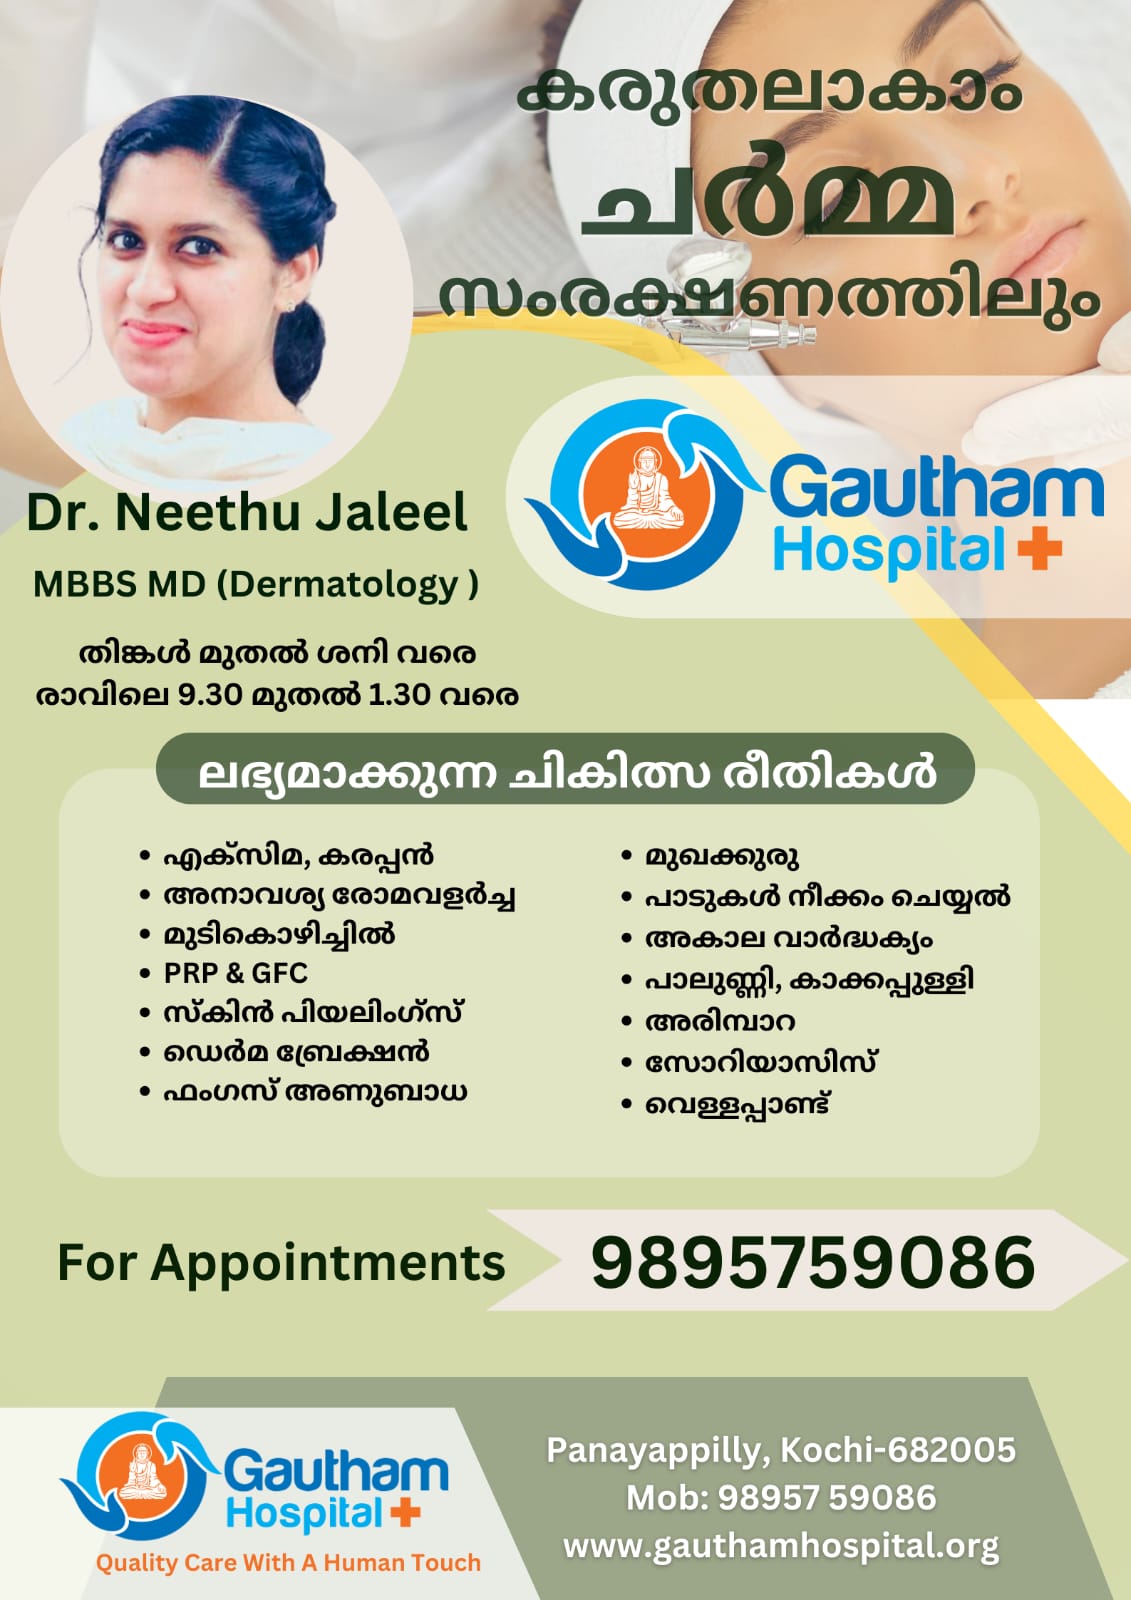 Gautham Hospital Welcomes Famous Dermatologist Dr.Neethu jaleel,MBBS,MD